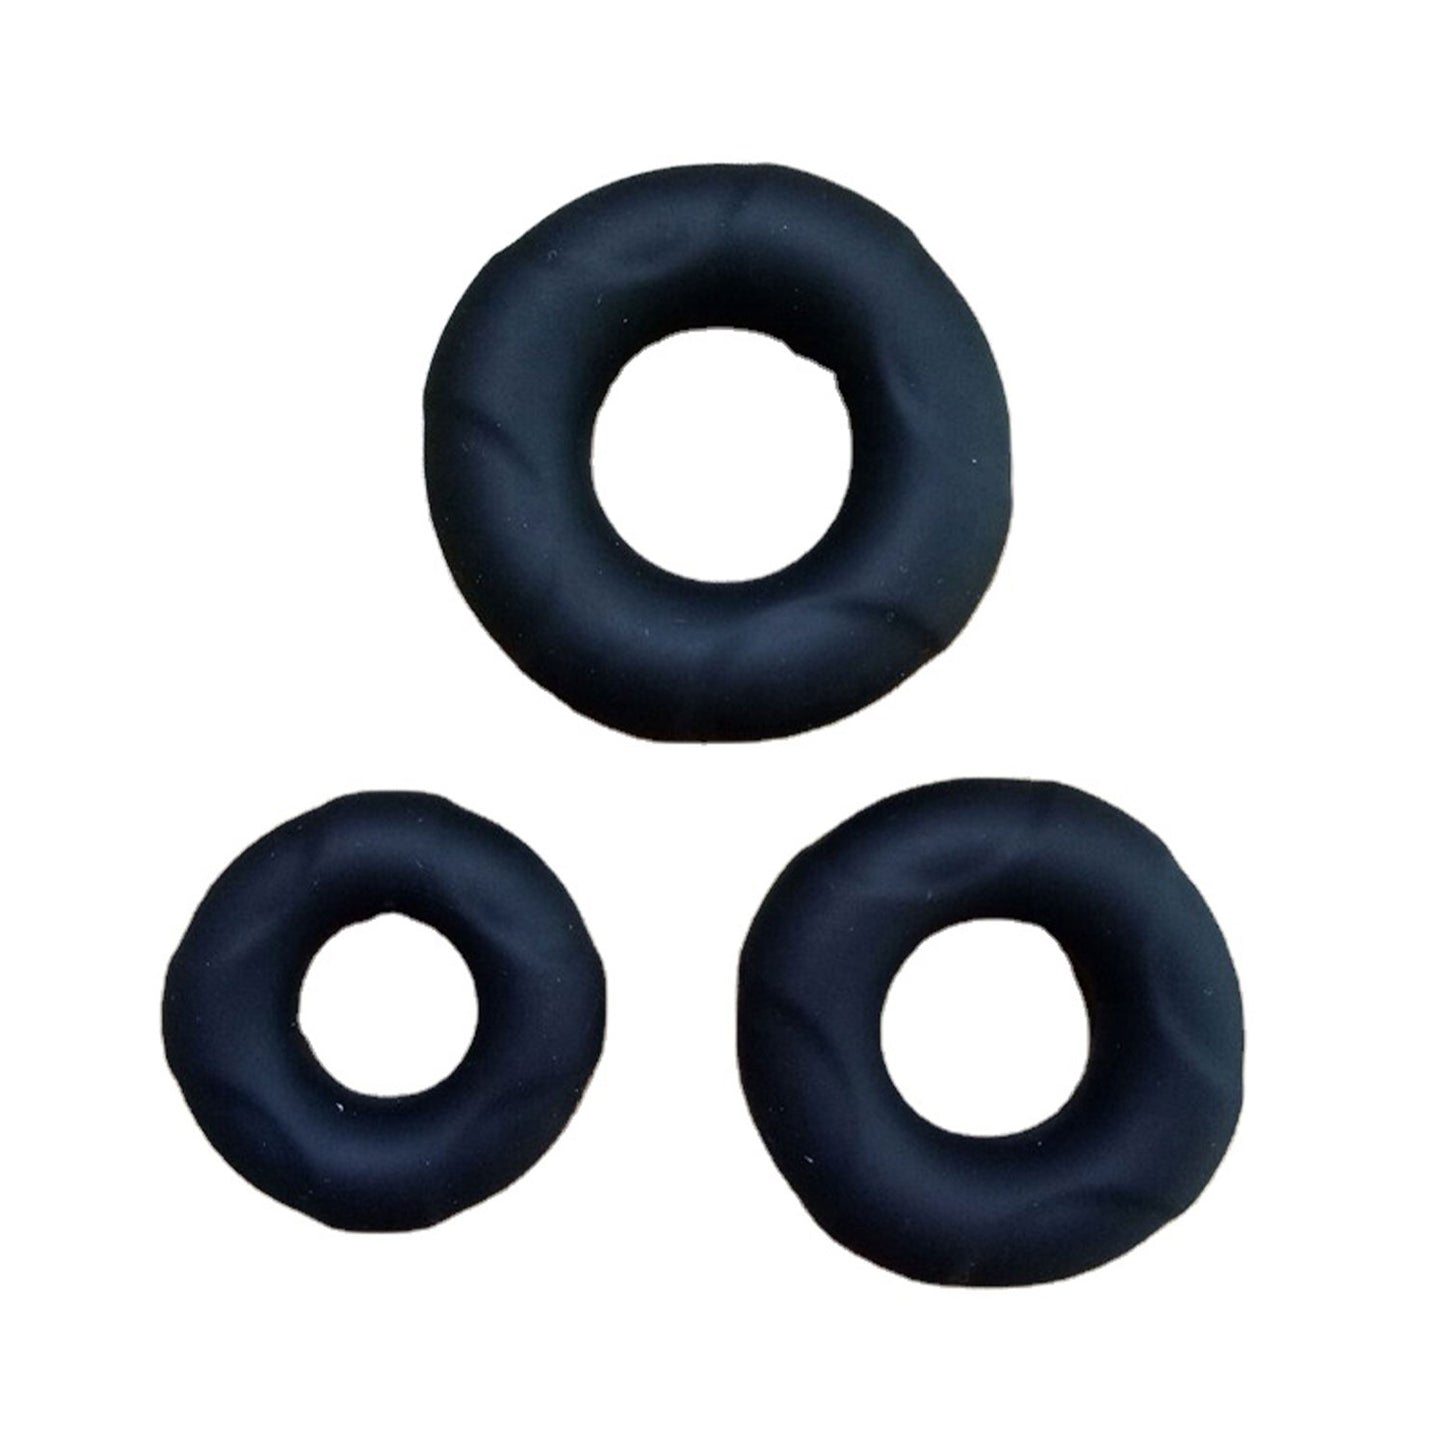 The Horny Company - John O 18mm Silicone Cock Ring Black Large